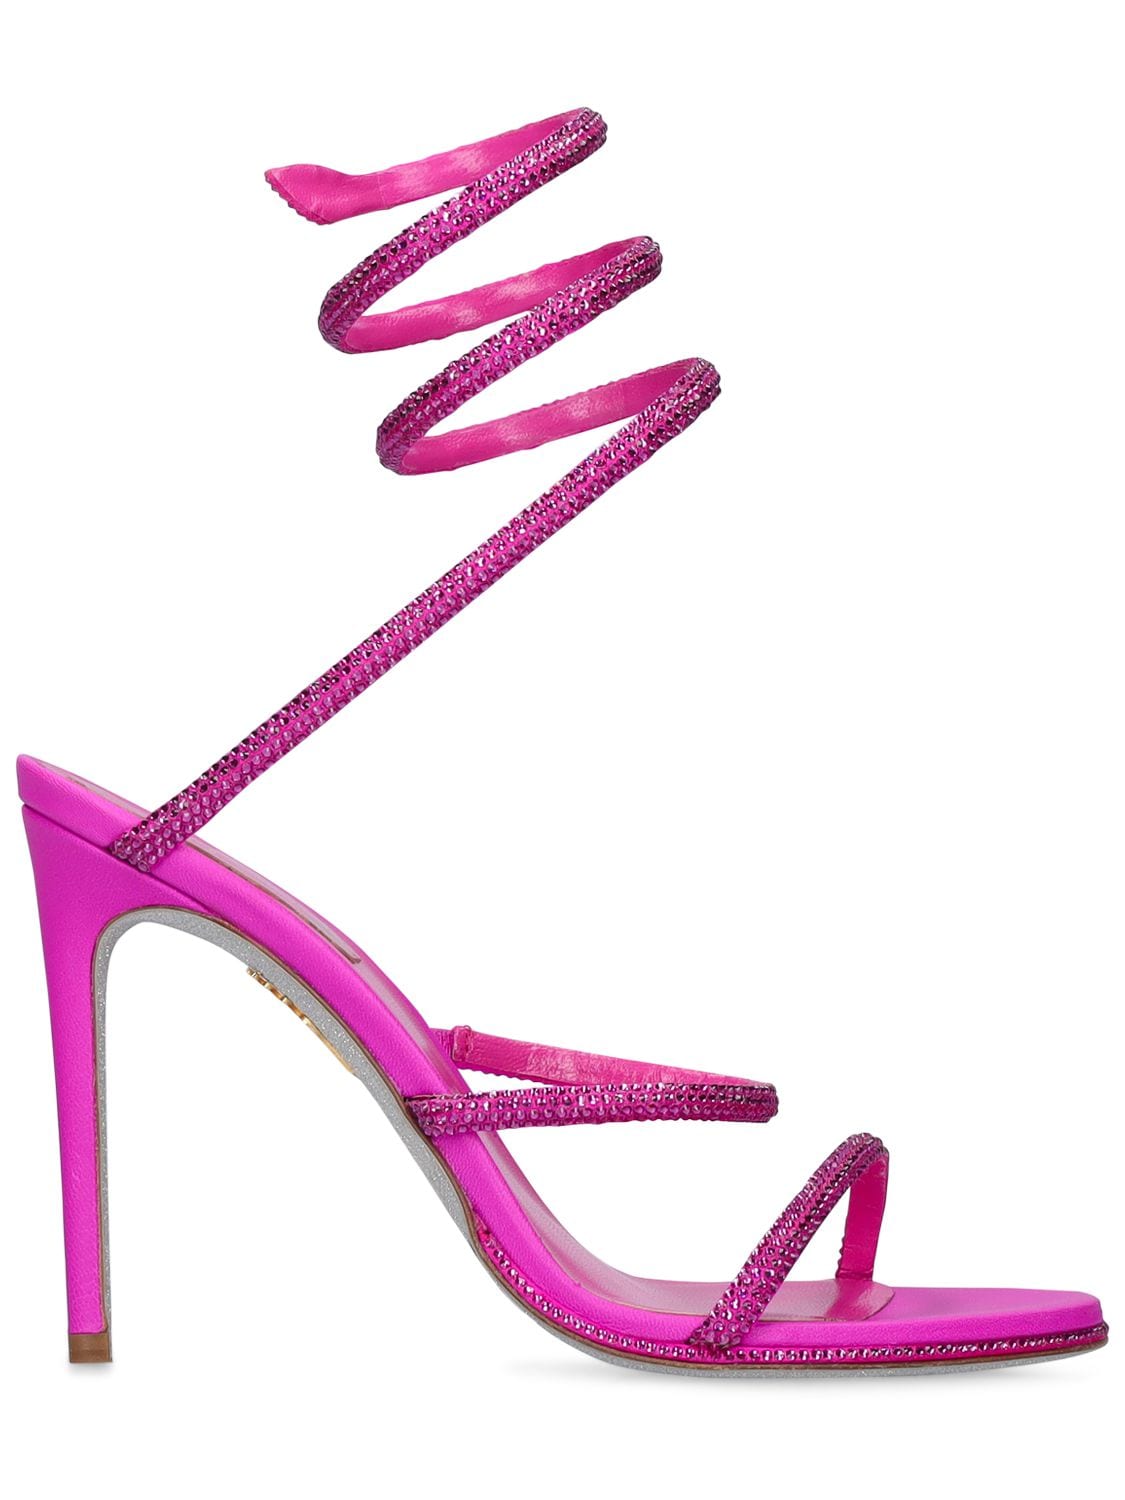 René Caovilla Cleo 105mm Crystal-embellished Sandals In Fuchsia